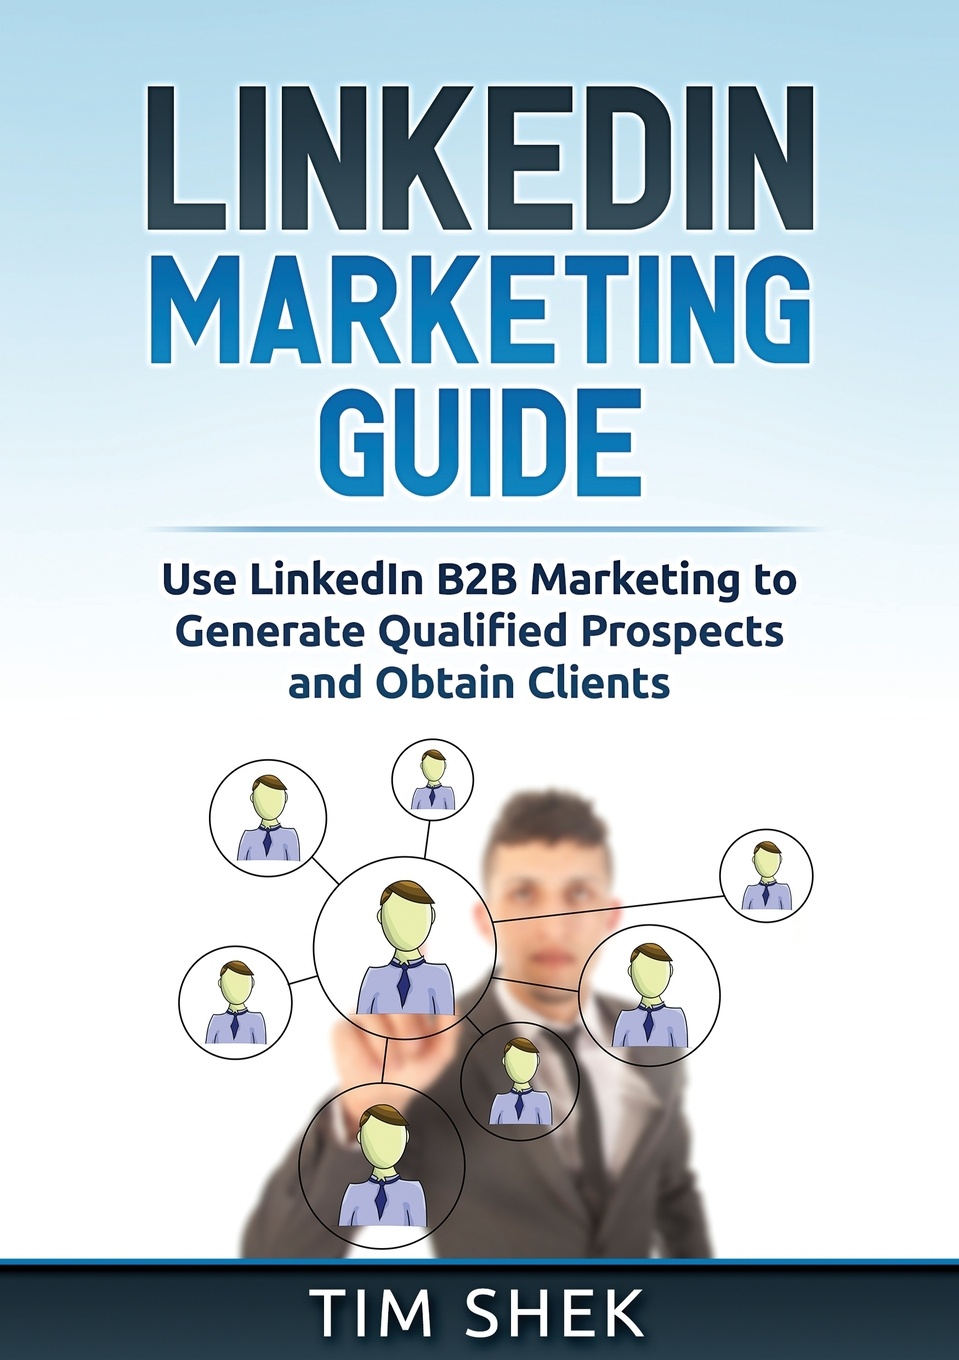 LinkedIn Marketing. Use LinkedIn B2B Marketing to Generate Qualified Prospects and Obtain Clients